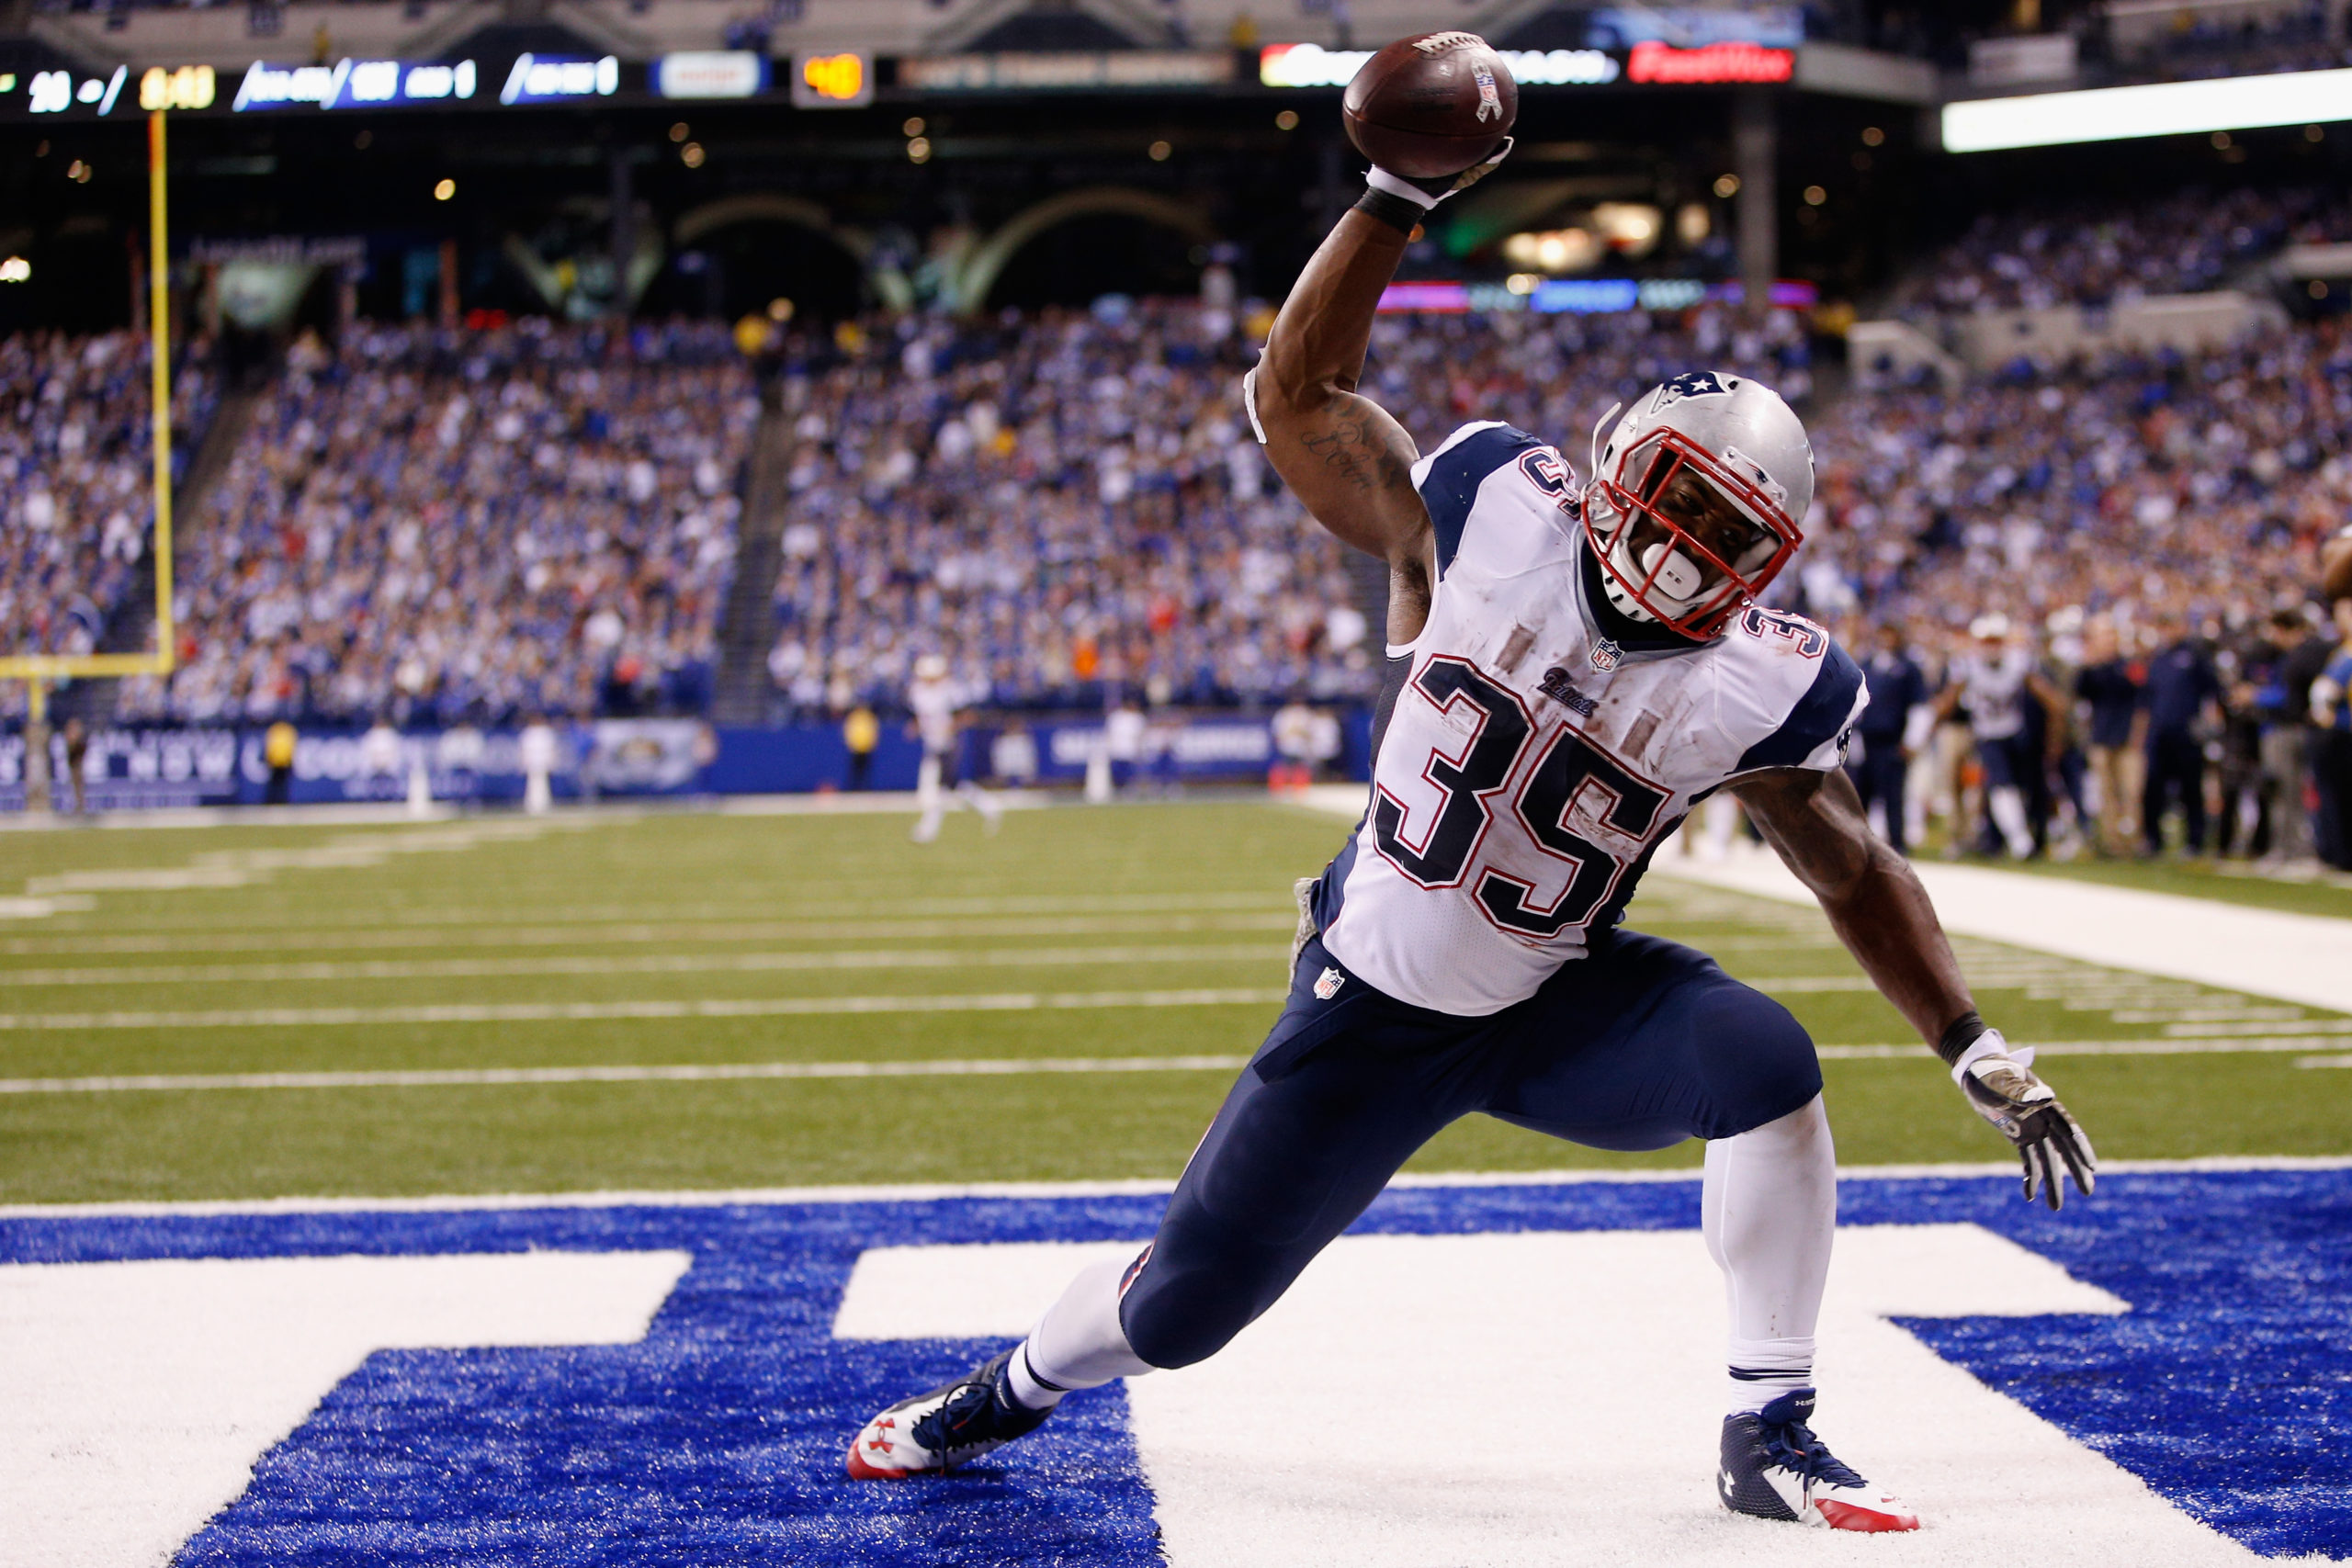 INDIANAPOLIS, IN - NOVEMBER 16: Jonas Gray #35 of the New England Patriots celebrates scoring his fourth touchdown against the Indianapolis Colts during the fourth quarter of the game at Lucas Oil Stadium on November 16, 2014 in Indianapolis, Indiana. Joe Robbins/Getty Images